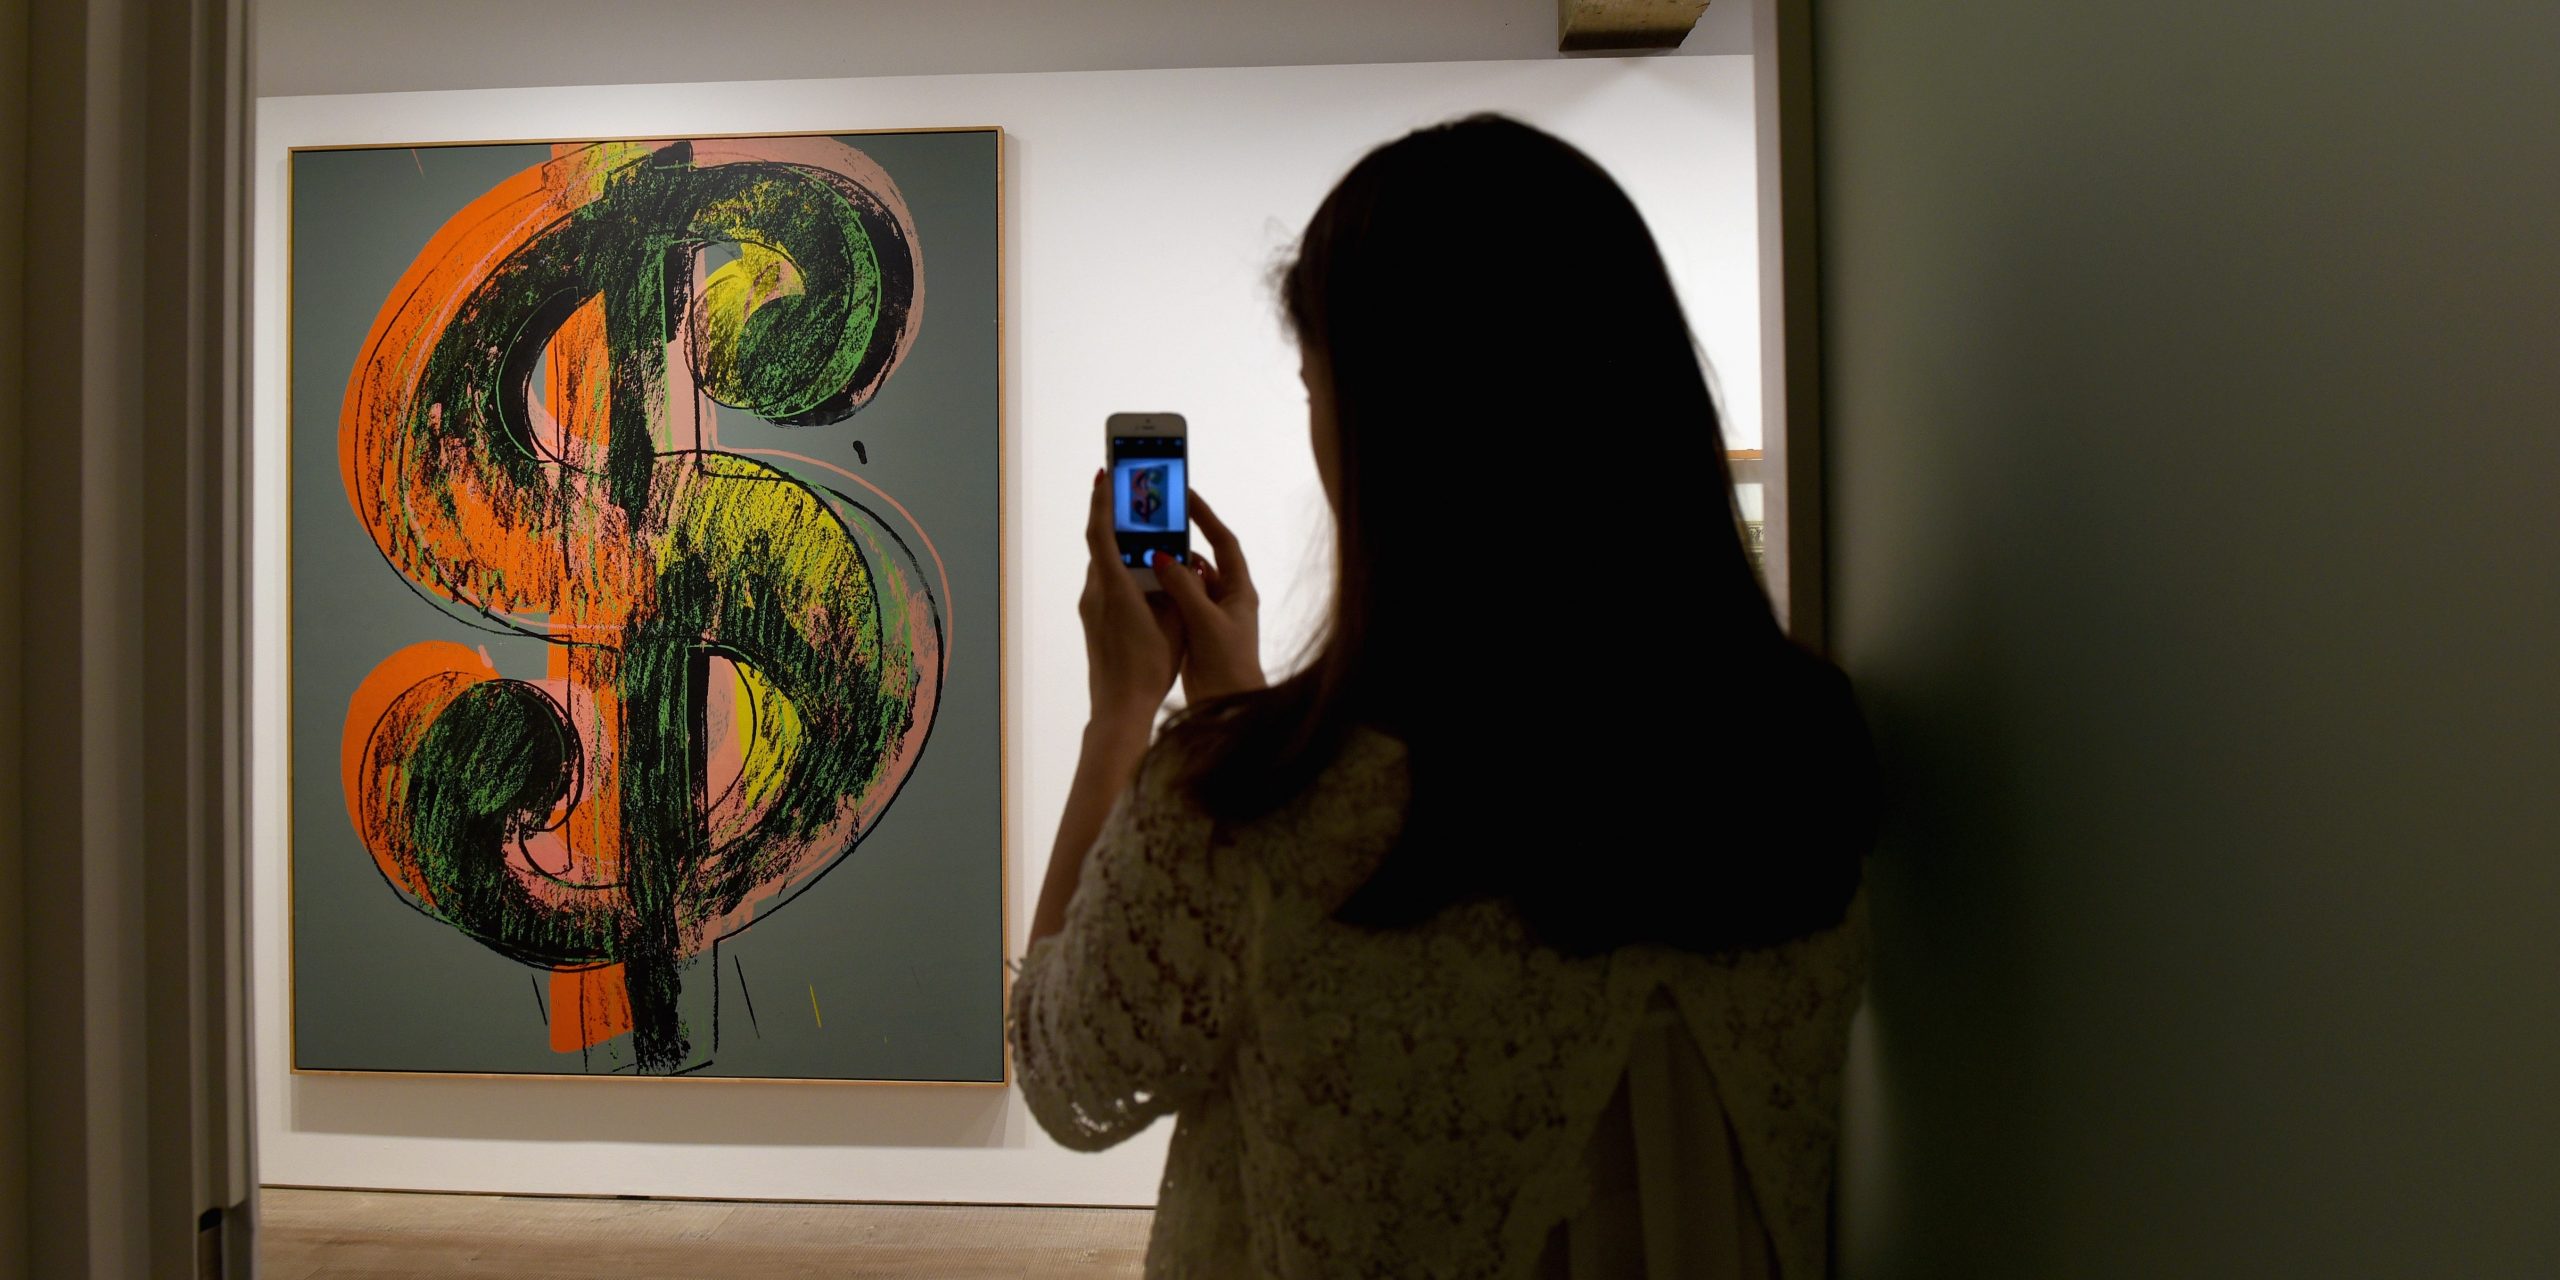 A woman takes a photograph on her mobile phone of artwork by Andy Warhol called Dollar Sign.